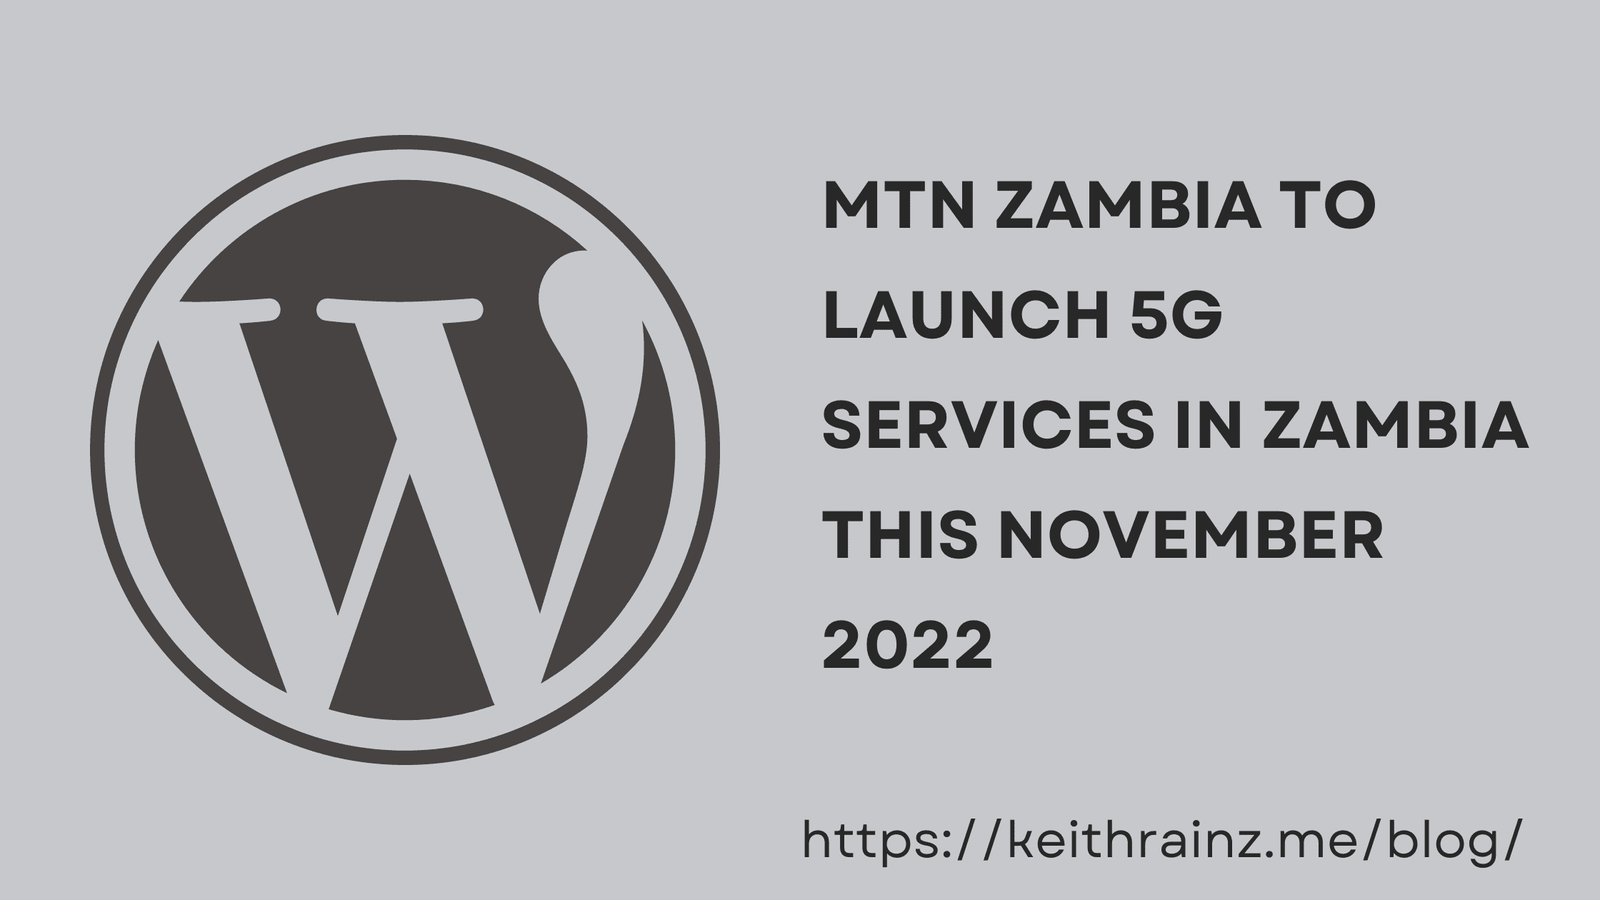 MTN ZAMBIA TO LAUNCH 5G SERVICES IN ZAMBIA THIS NOVEMBER 2022